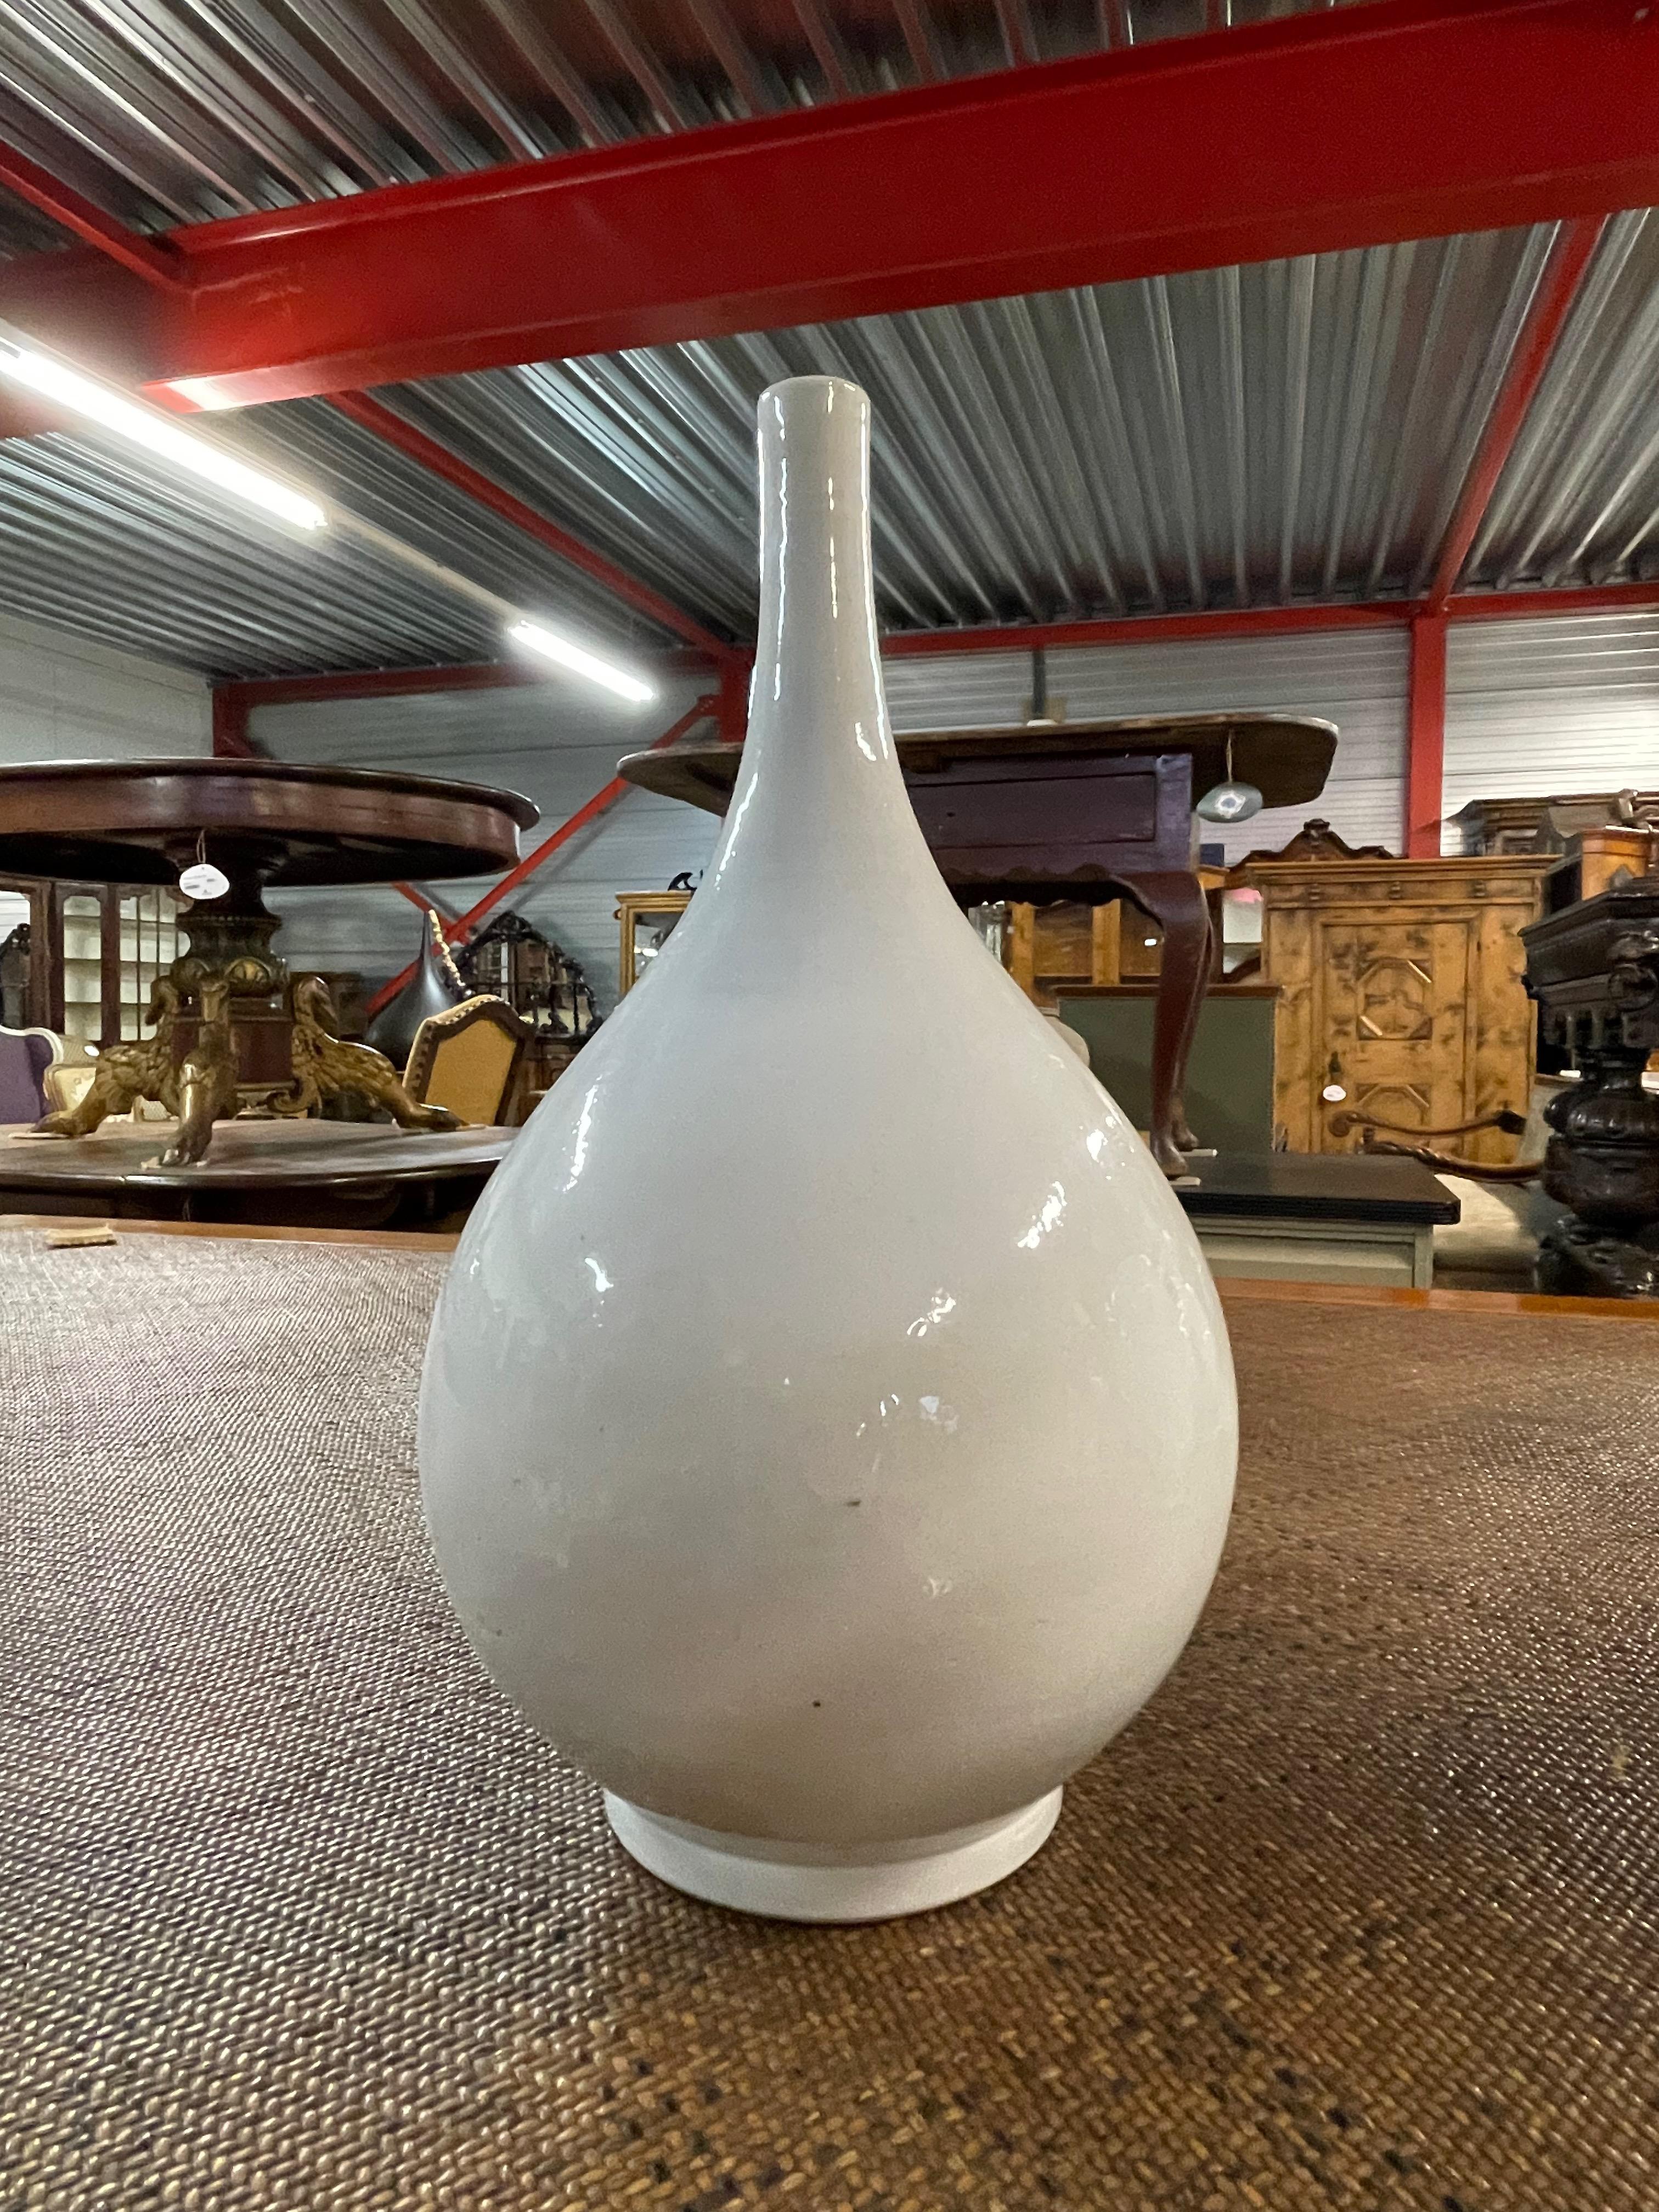 Contemporary Chinese white long thin neck spout vase.
Two available and sold individually.
From a large collection of white vases in different sizes and shapes.